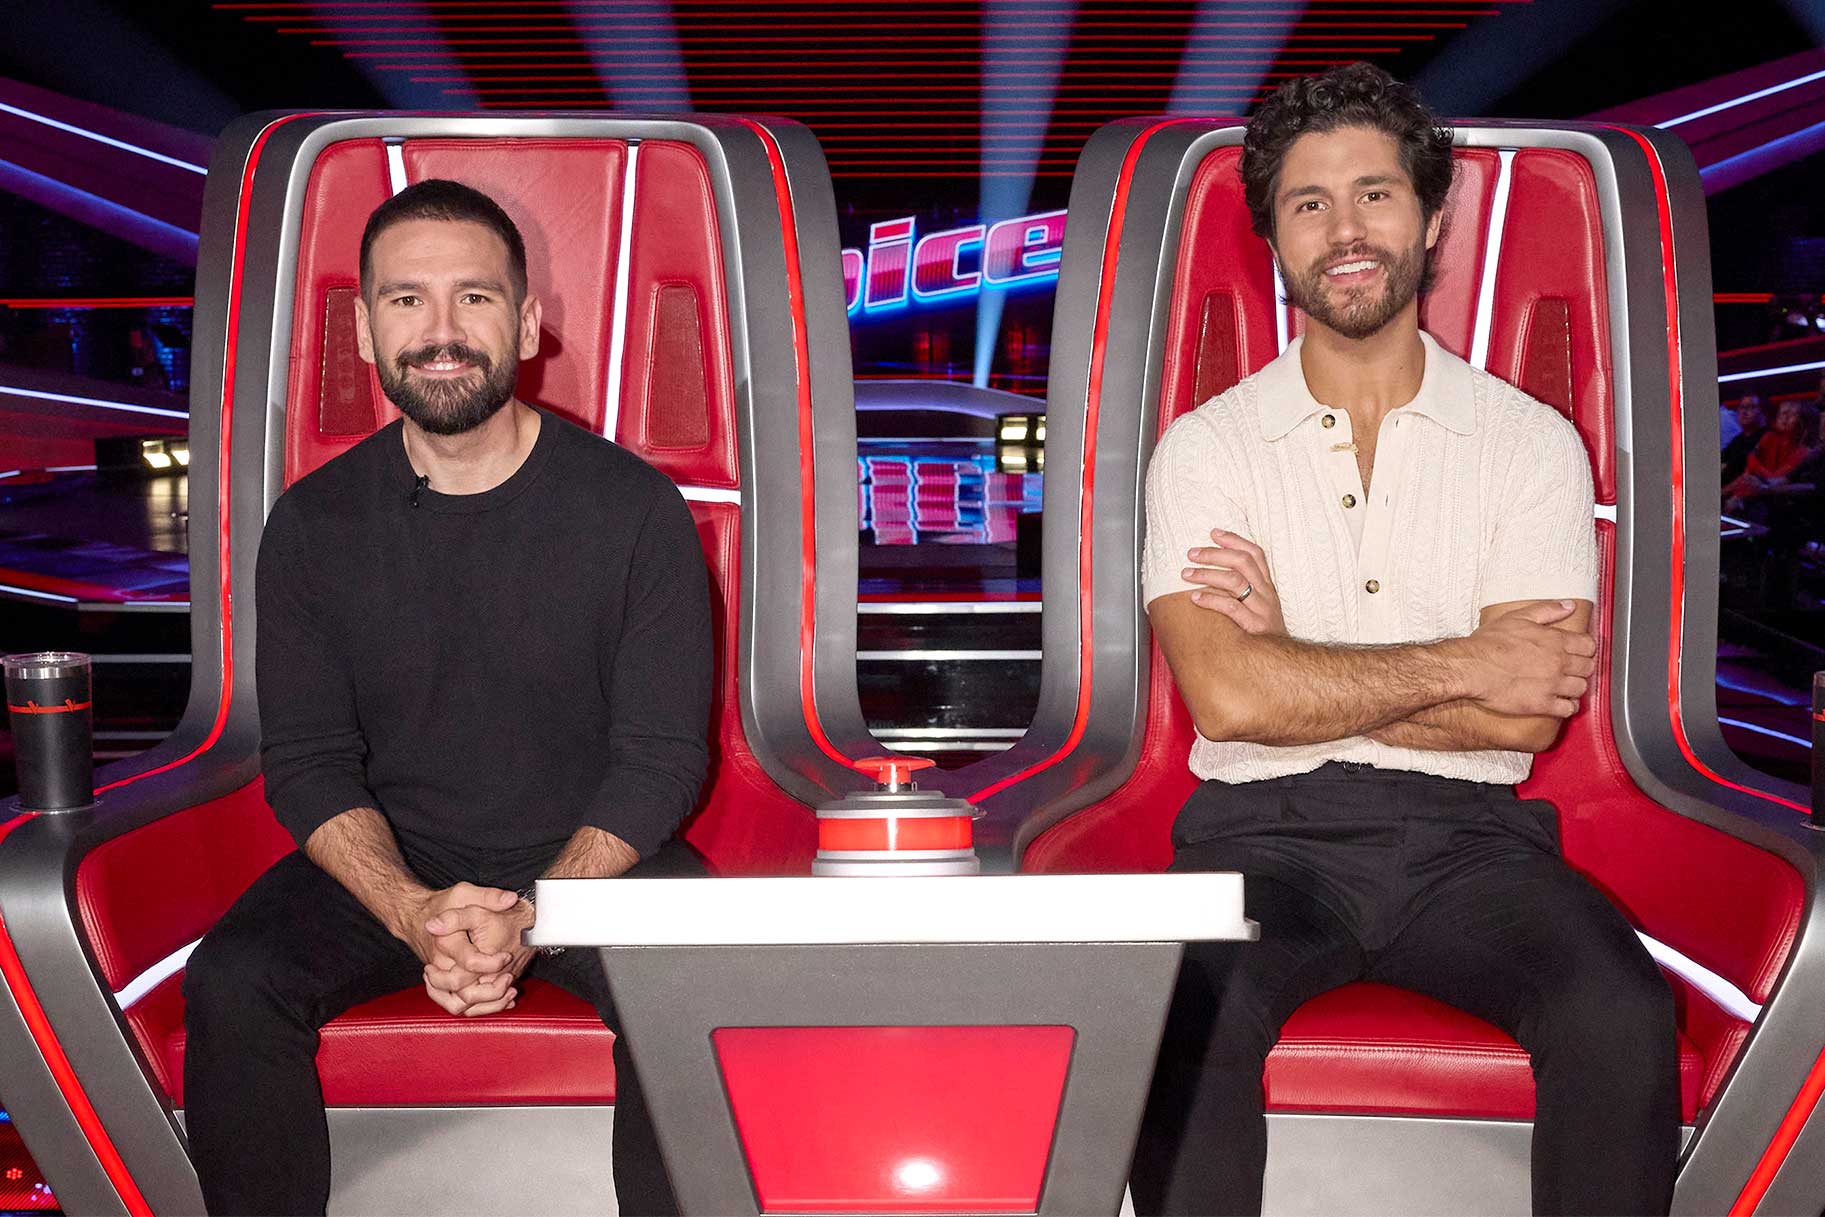 How Do Dan + Shay Decide to Push Their Button on The Voice? NBC Insider